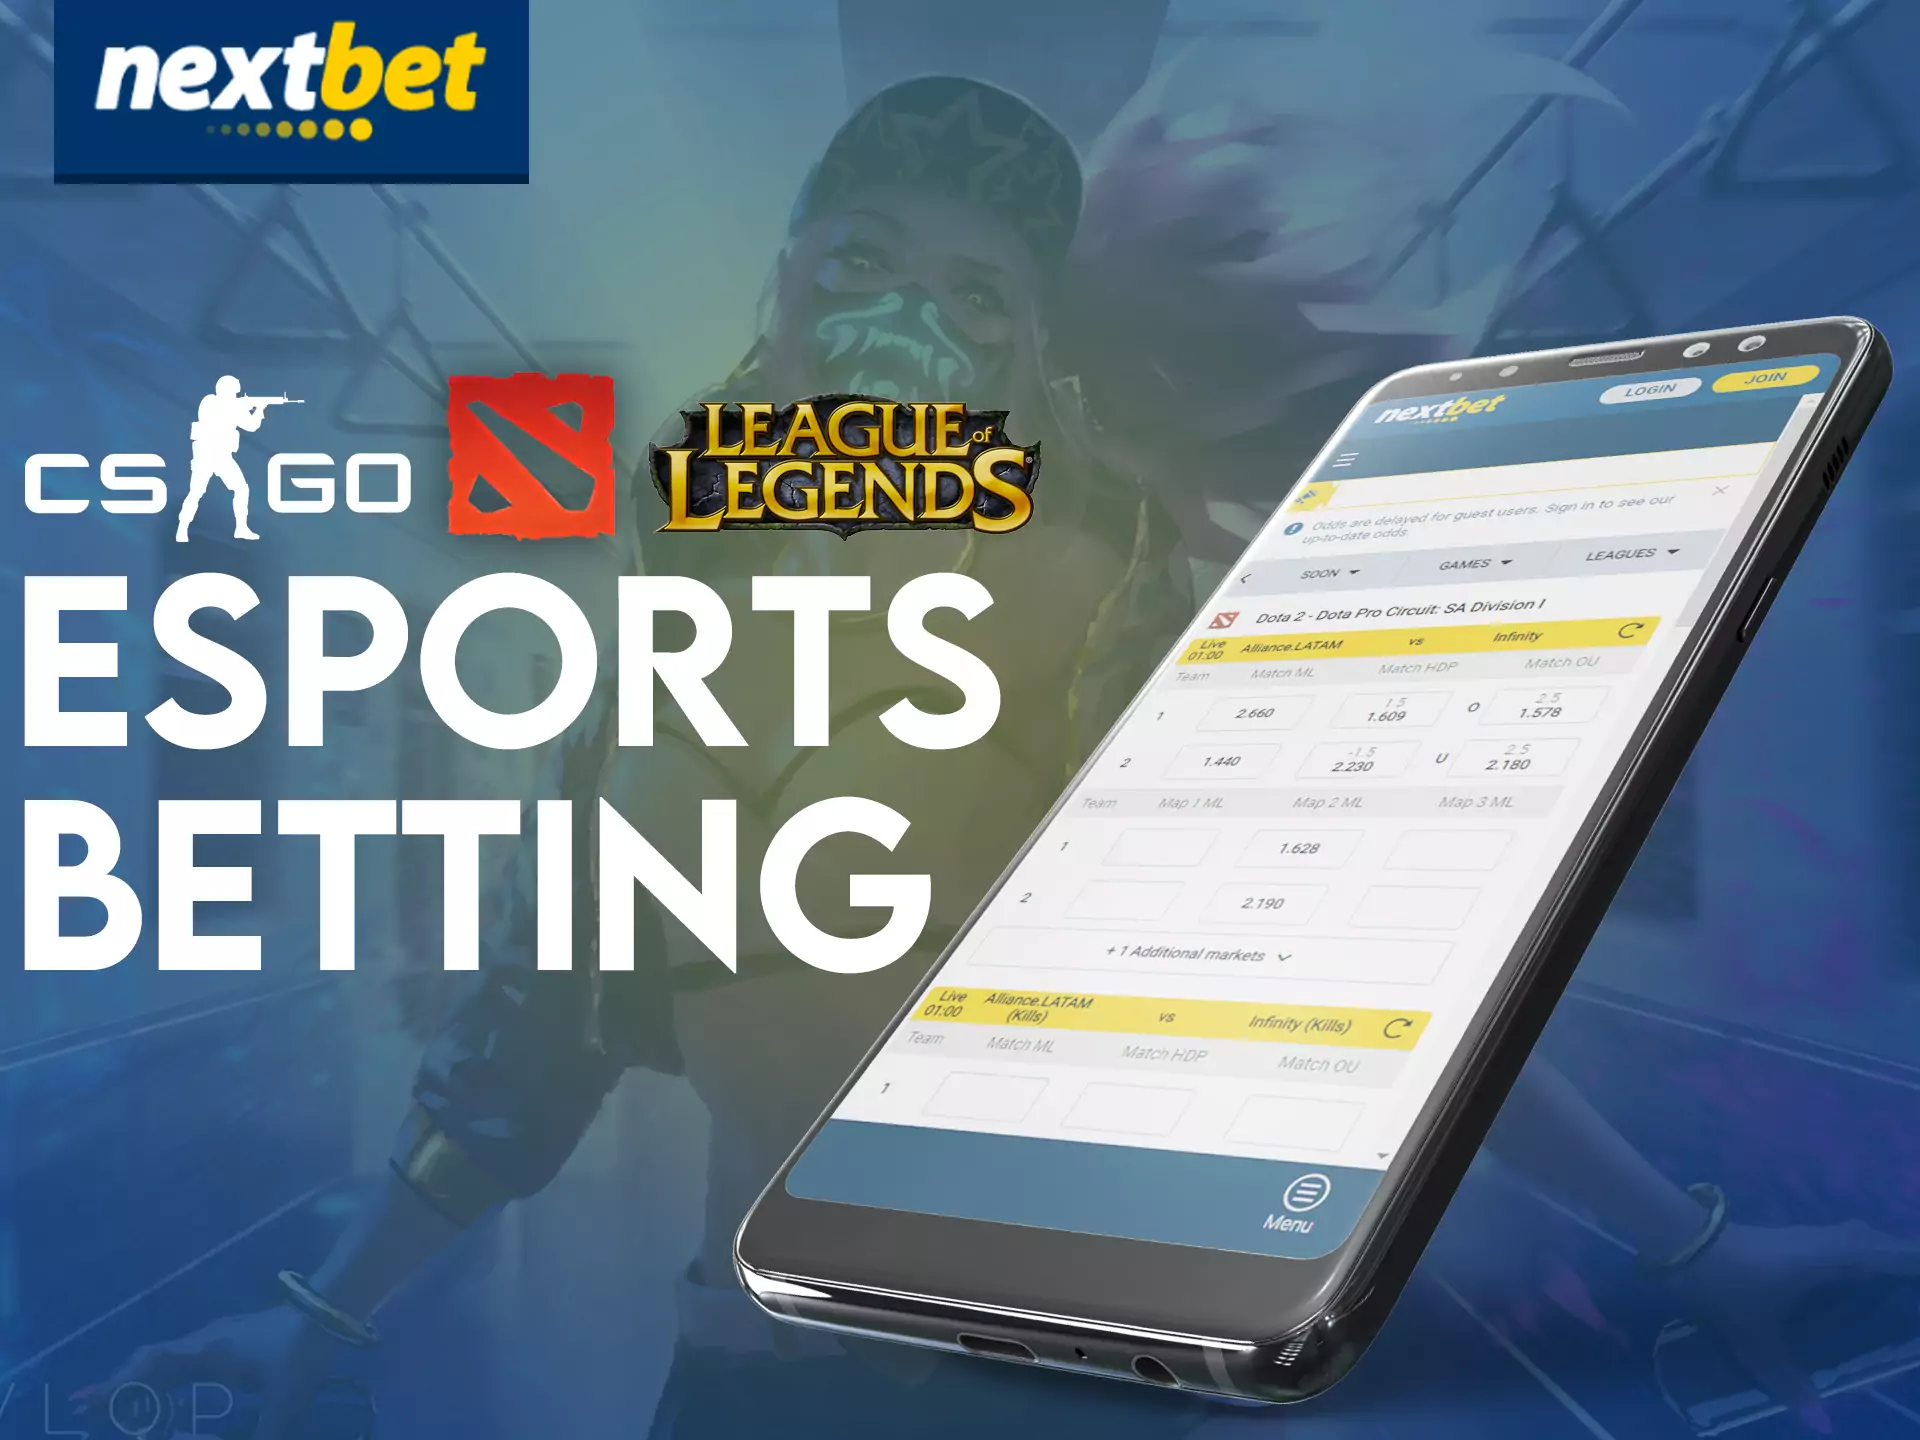 You can place bets on esports in the Nextbet app.